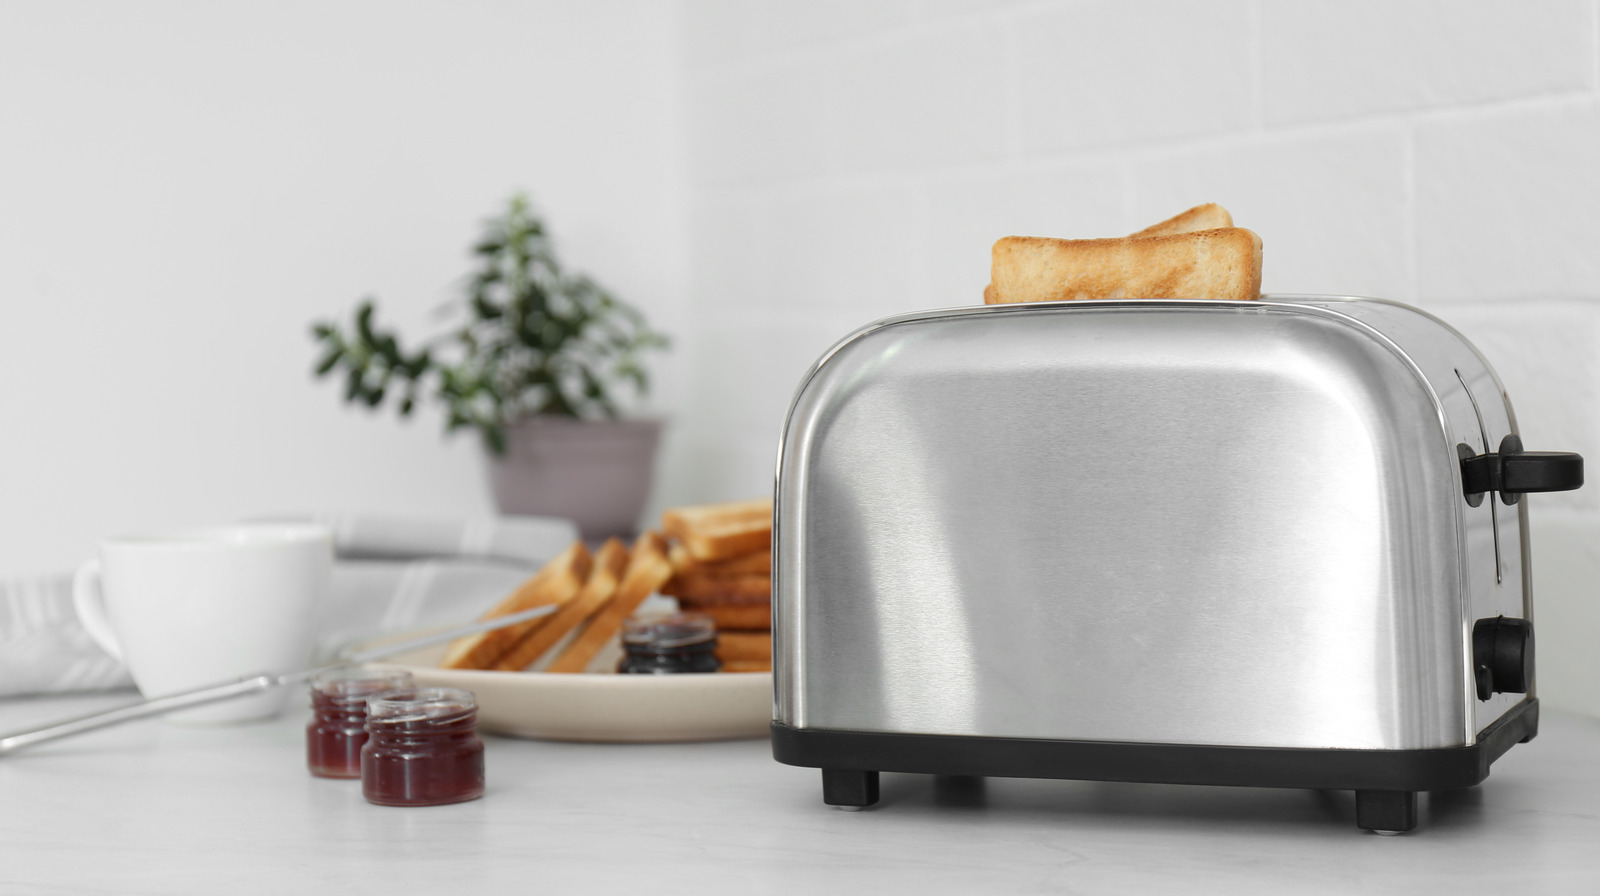 Look no further, the future of toasters is right in front of you